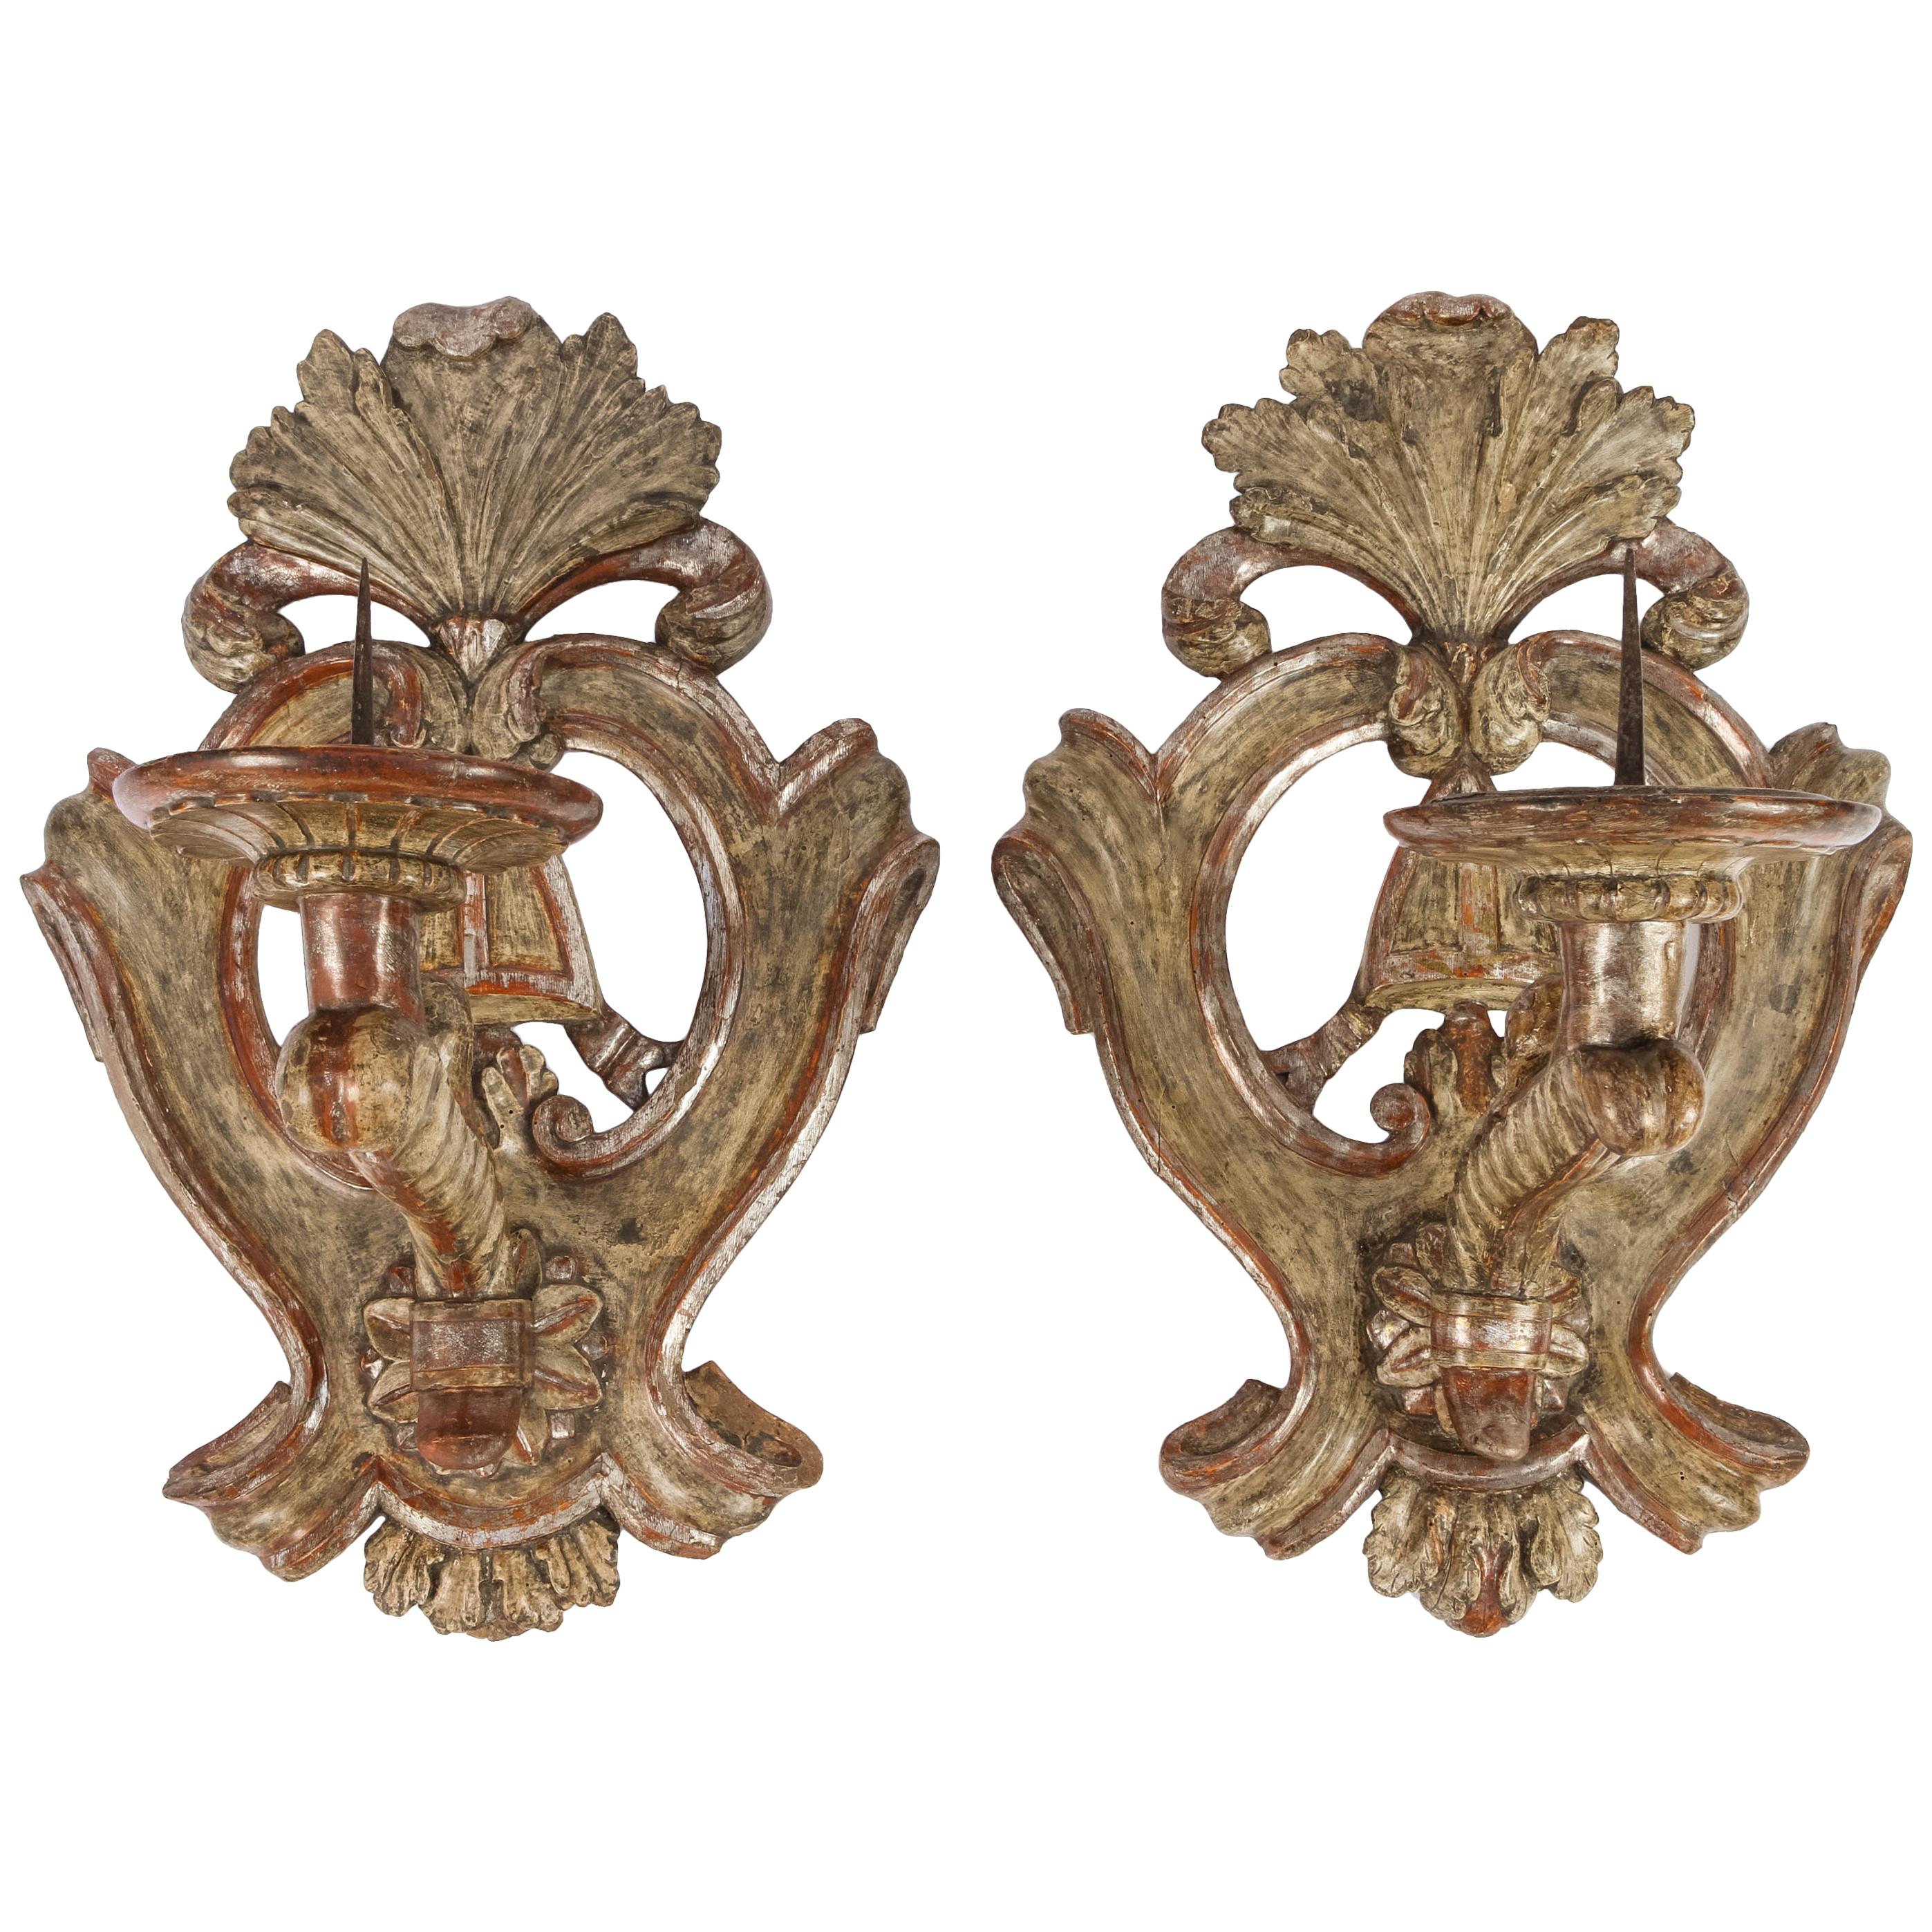 Pair of 19th Century Large Italian Carved Wood Candle Sconces